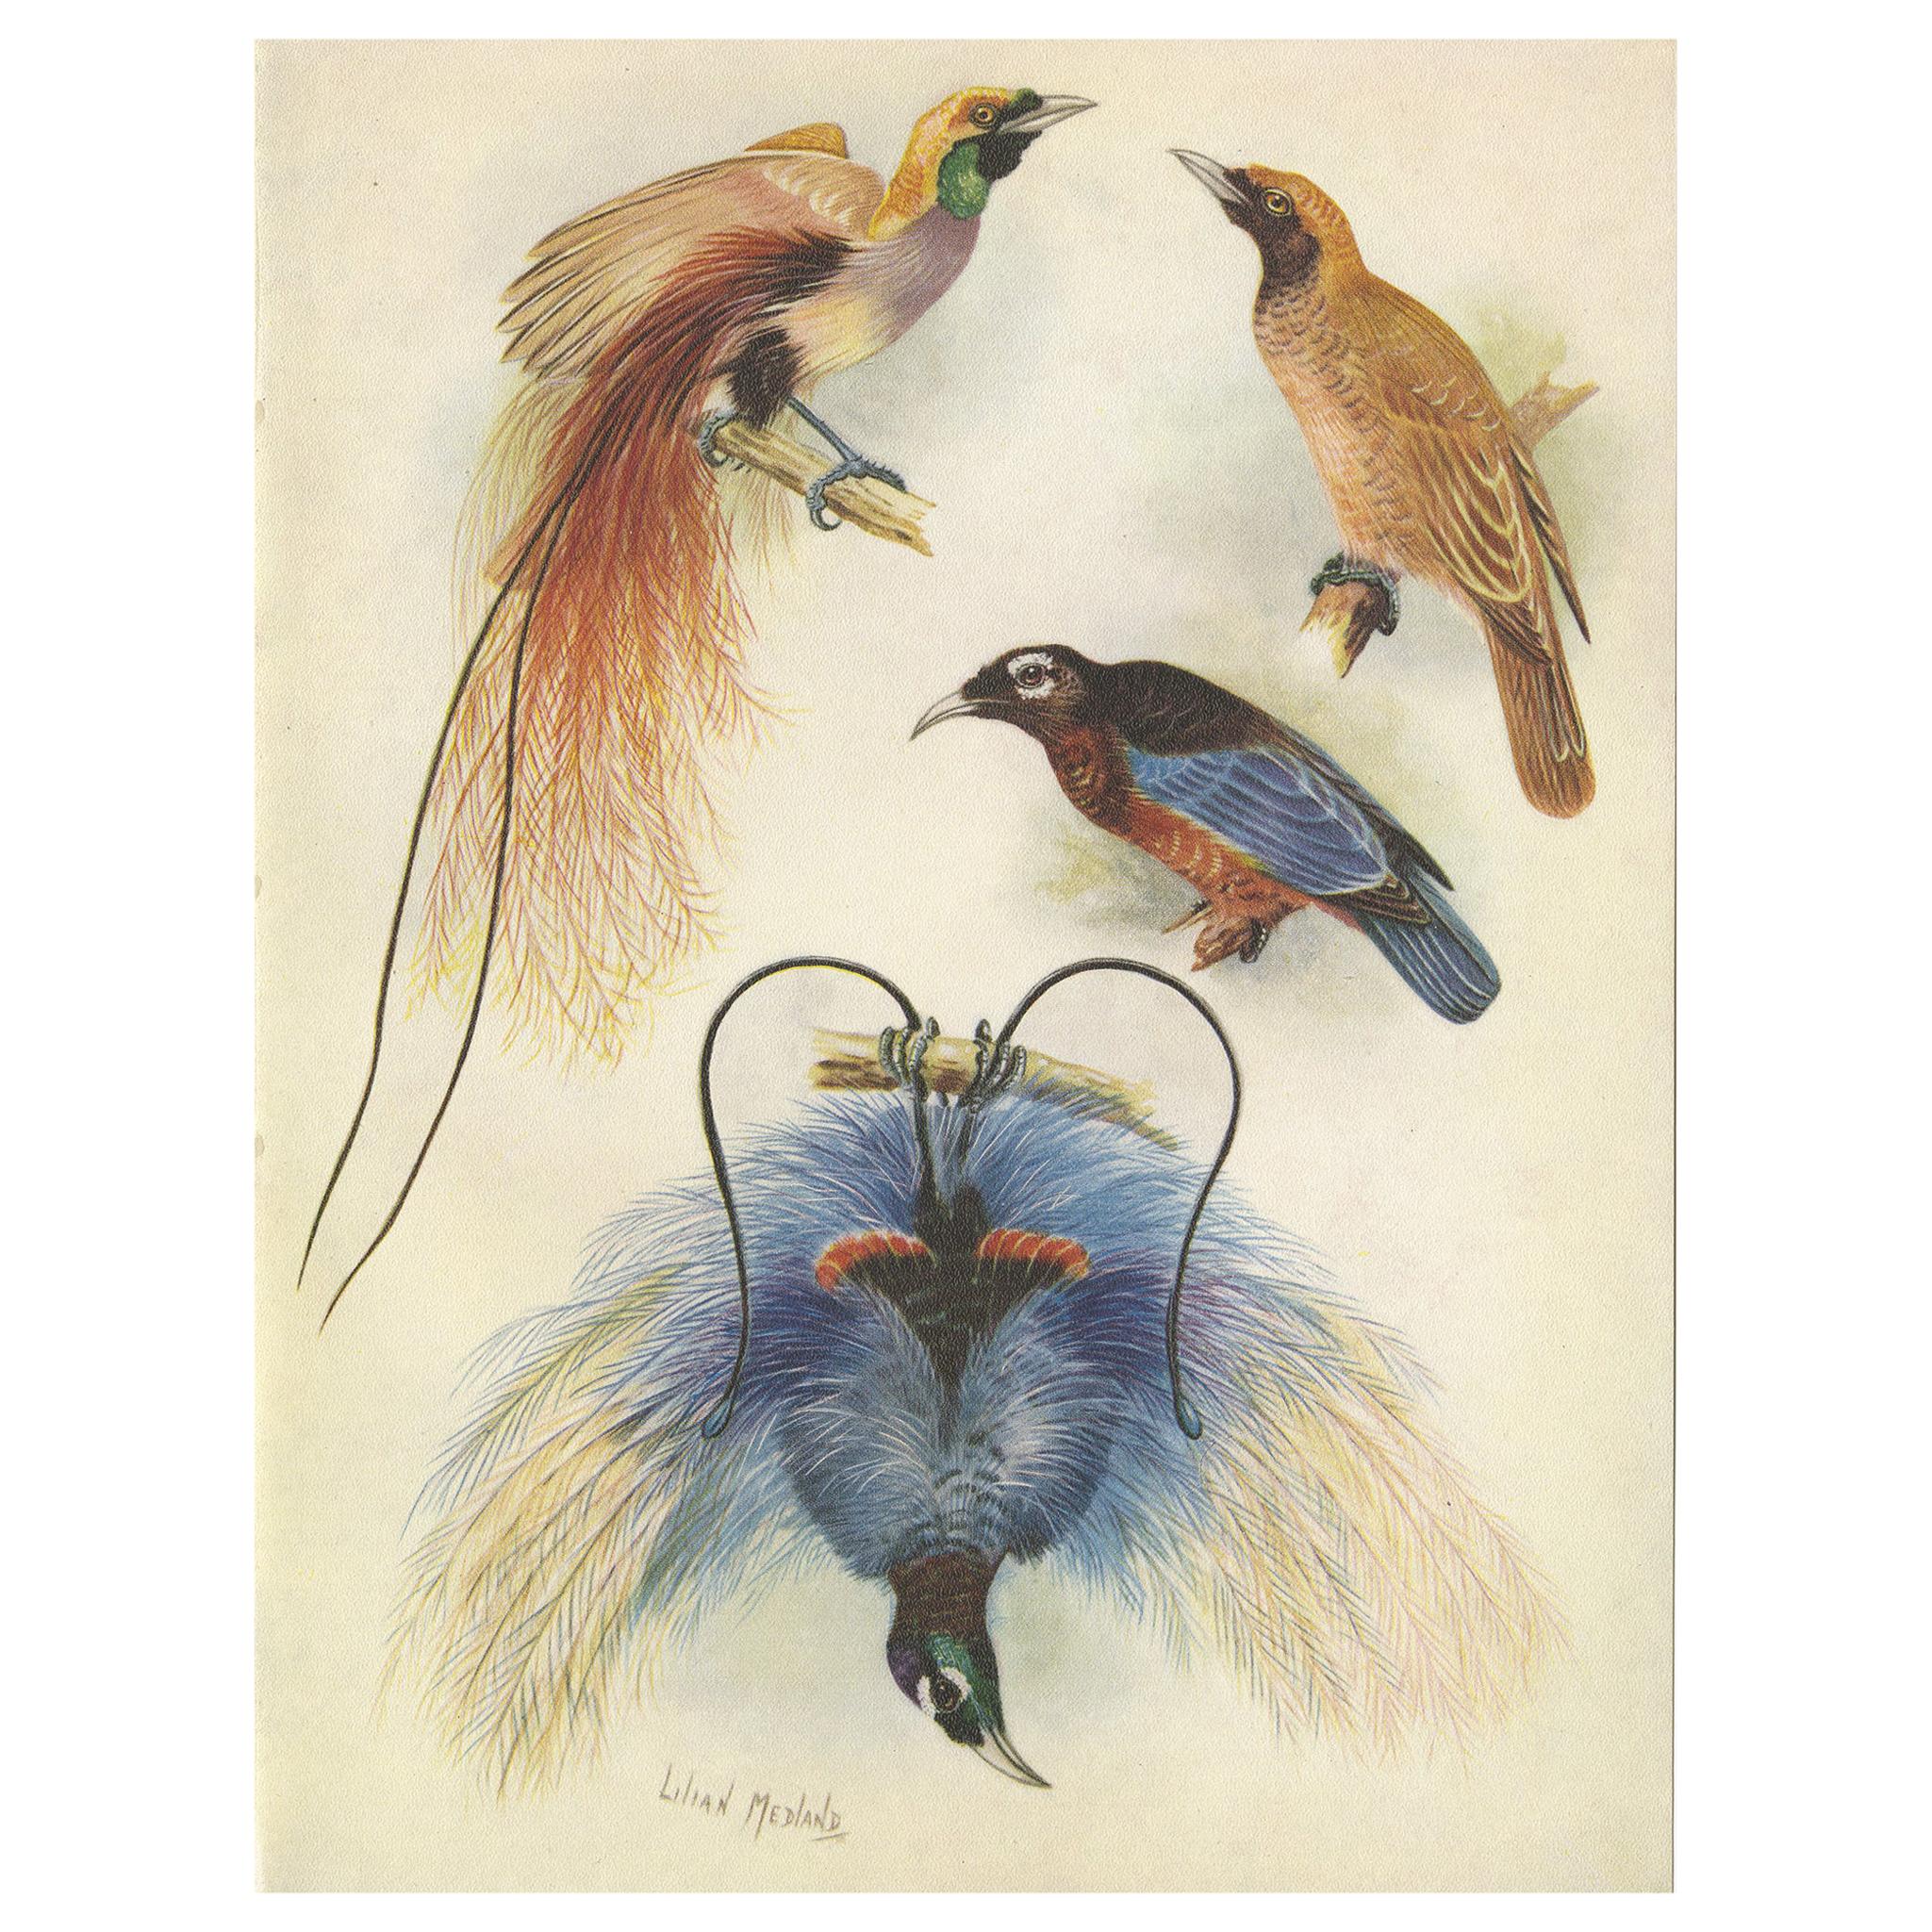 Antique Print of the Goldie's Bird of Paradise and the Blue Bird of Paradise